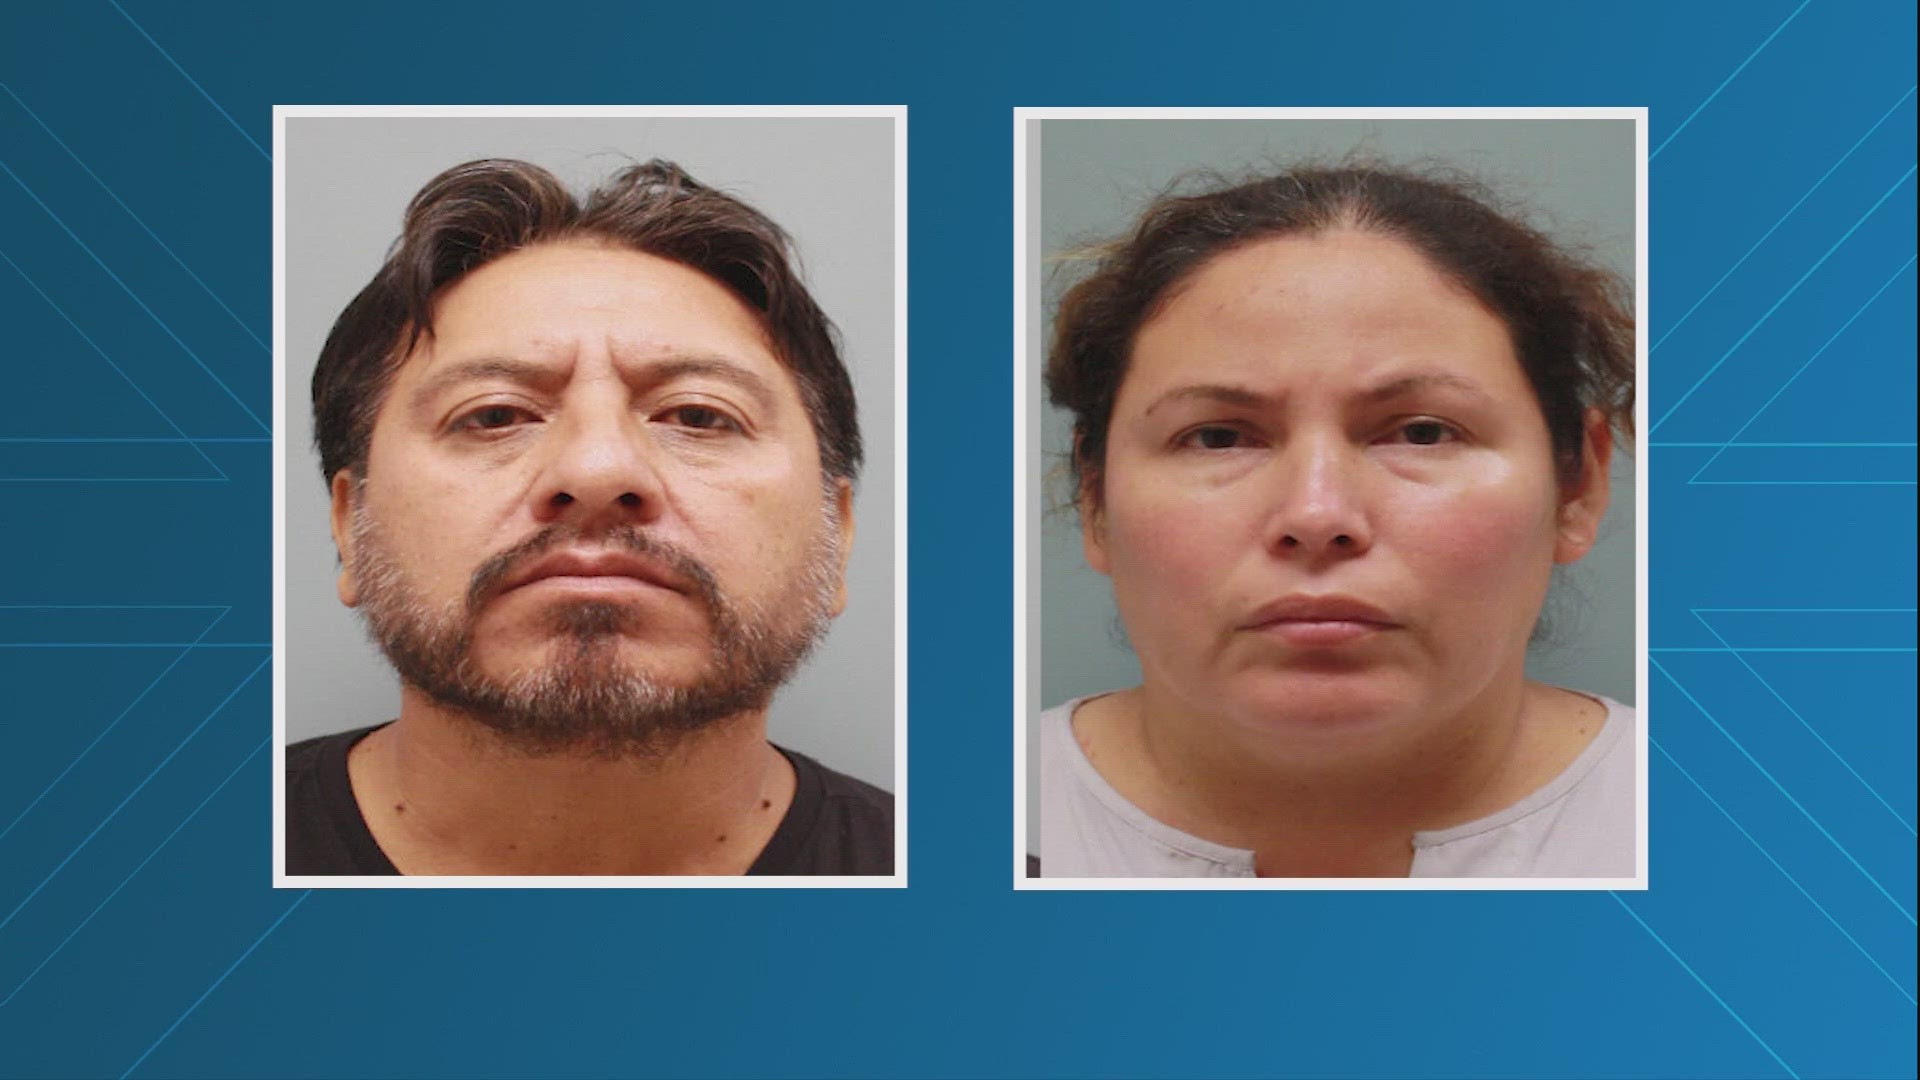 According to court documents, when Narciso Banos found out that Francisco Romero had an affair with his wife, he tied him up and beat him to death.